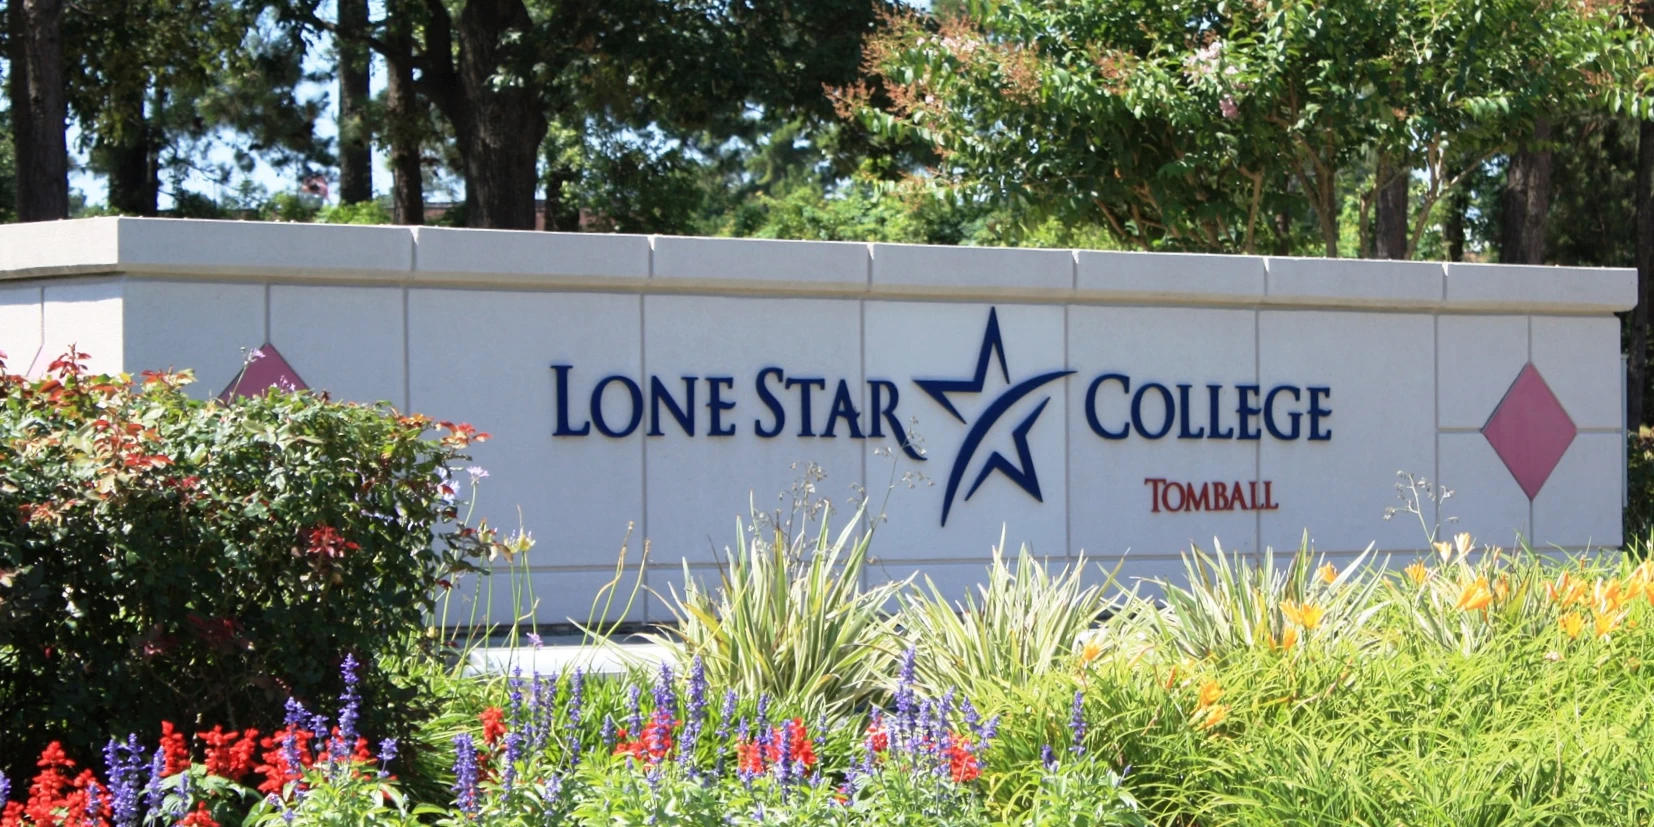 Tomball College